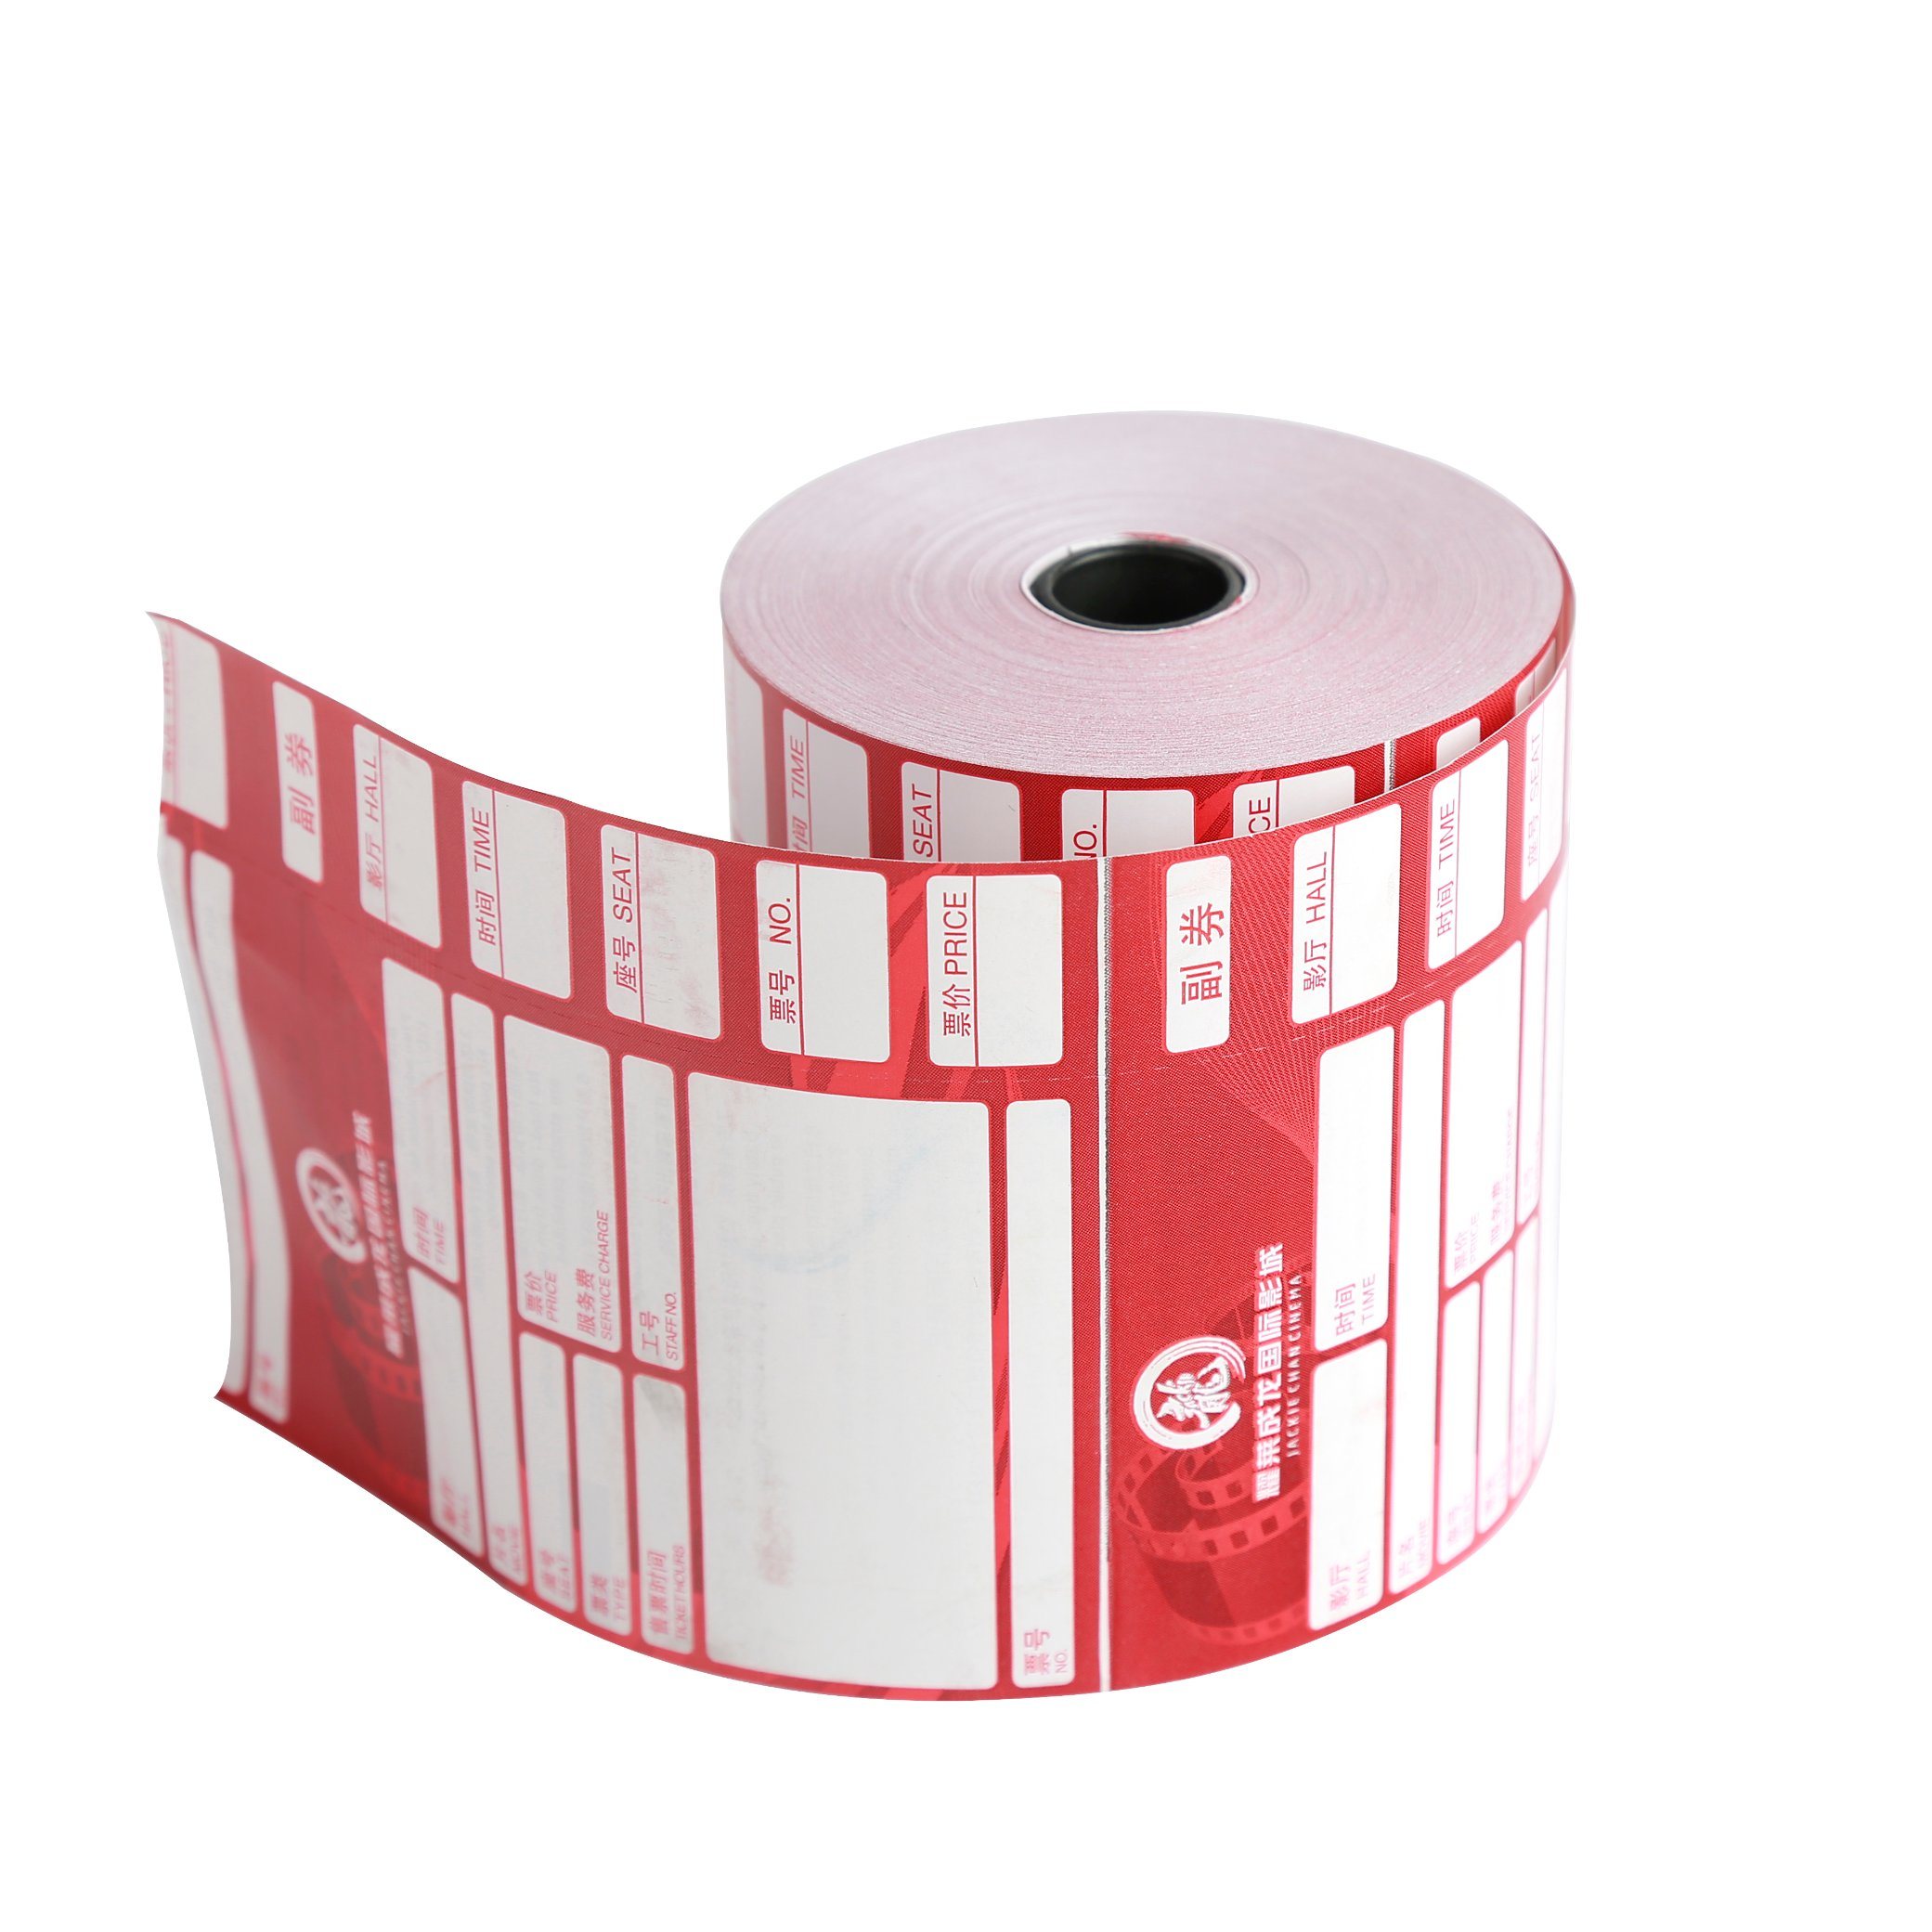 MYNDS Brand Theater  Movie Tickets Thermal Paper  Rolls 